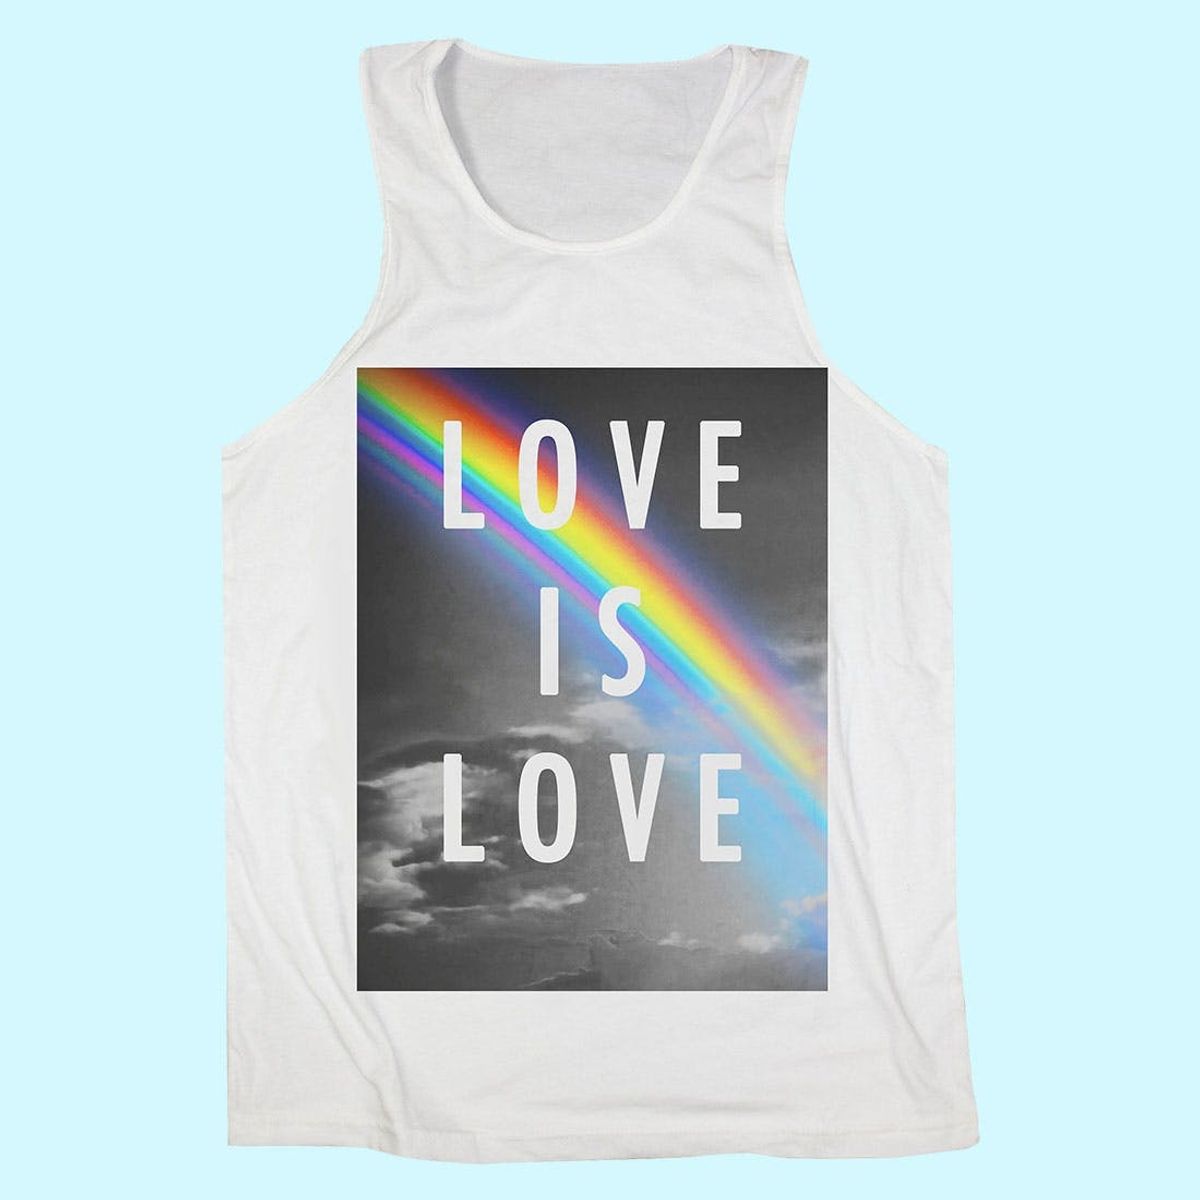 Target’s Latest Collection Has Pride Month in Mind